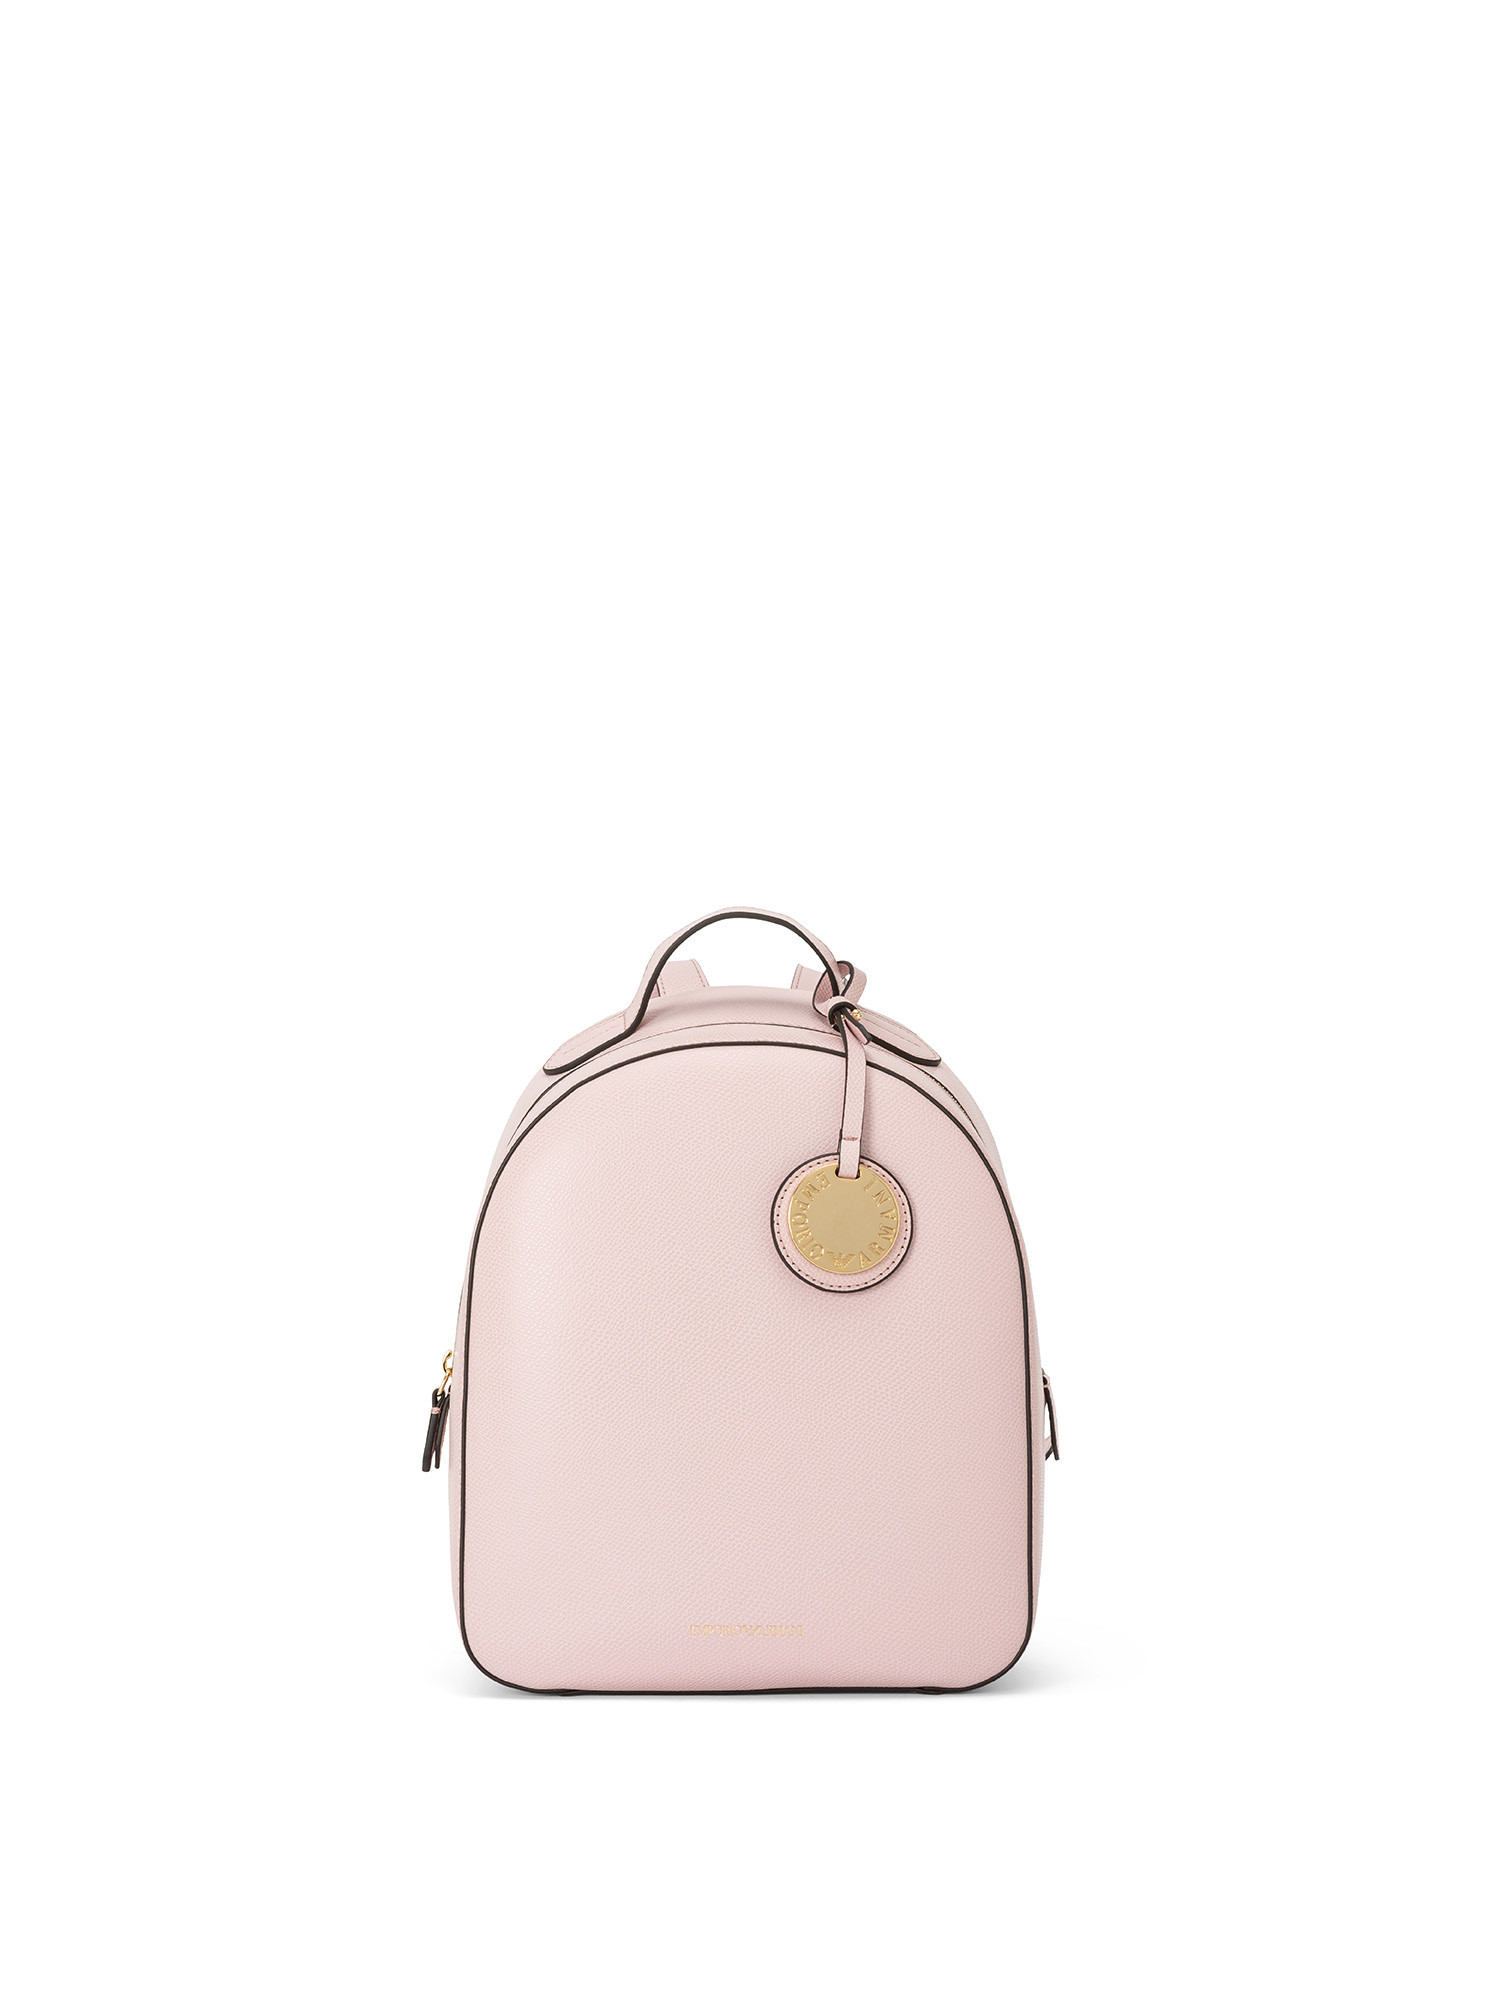 Emporio Armani - Backpack with charm, Pink, large image number 0